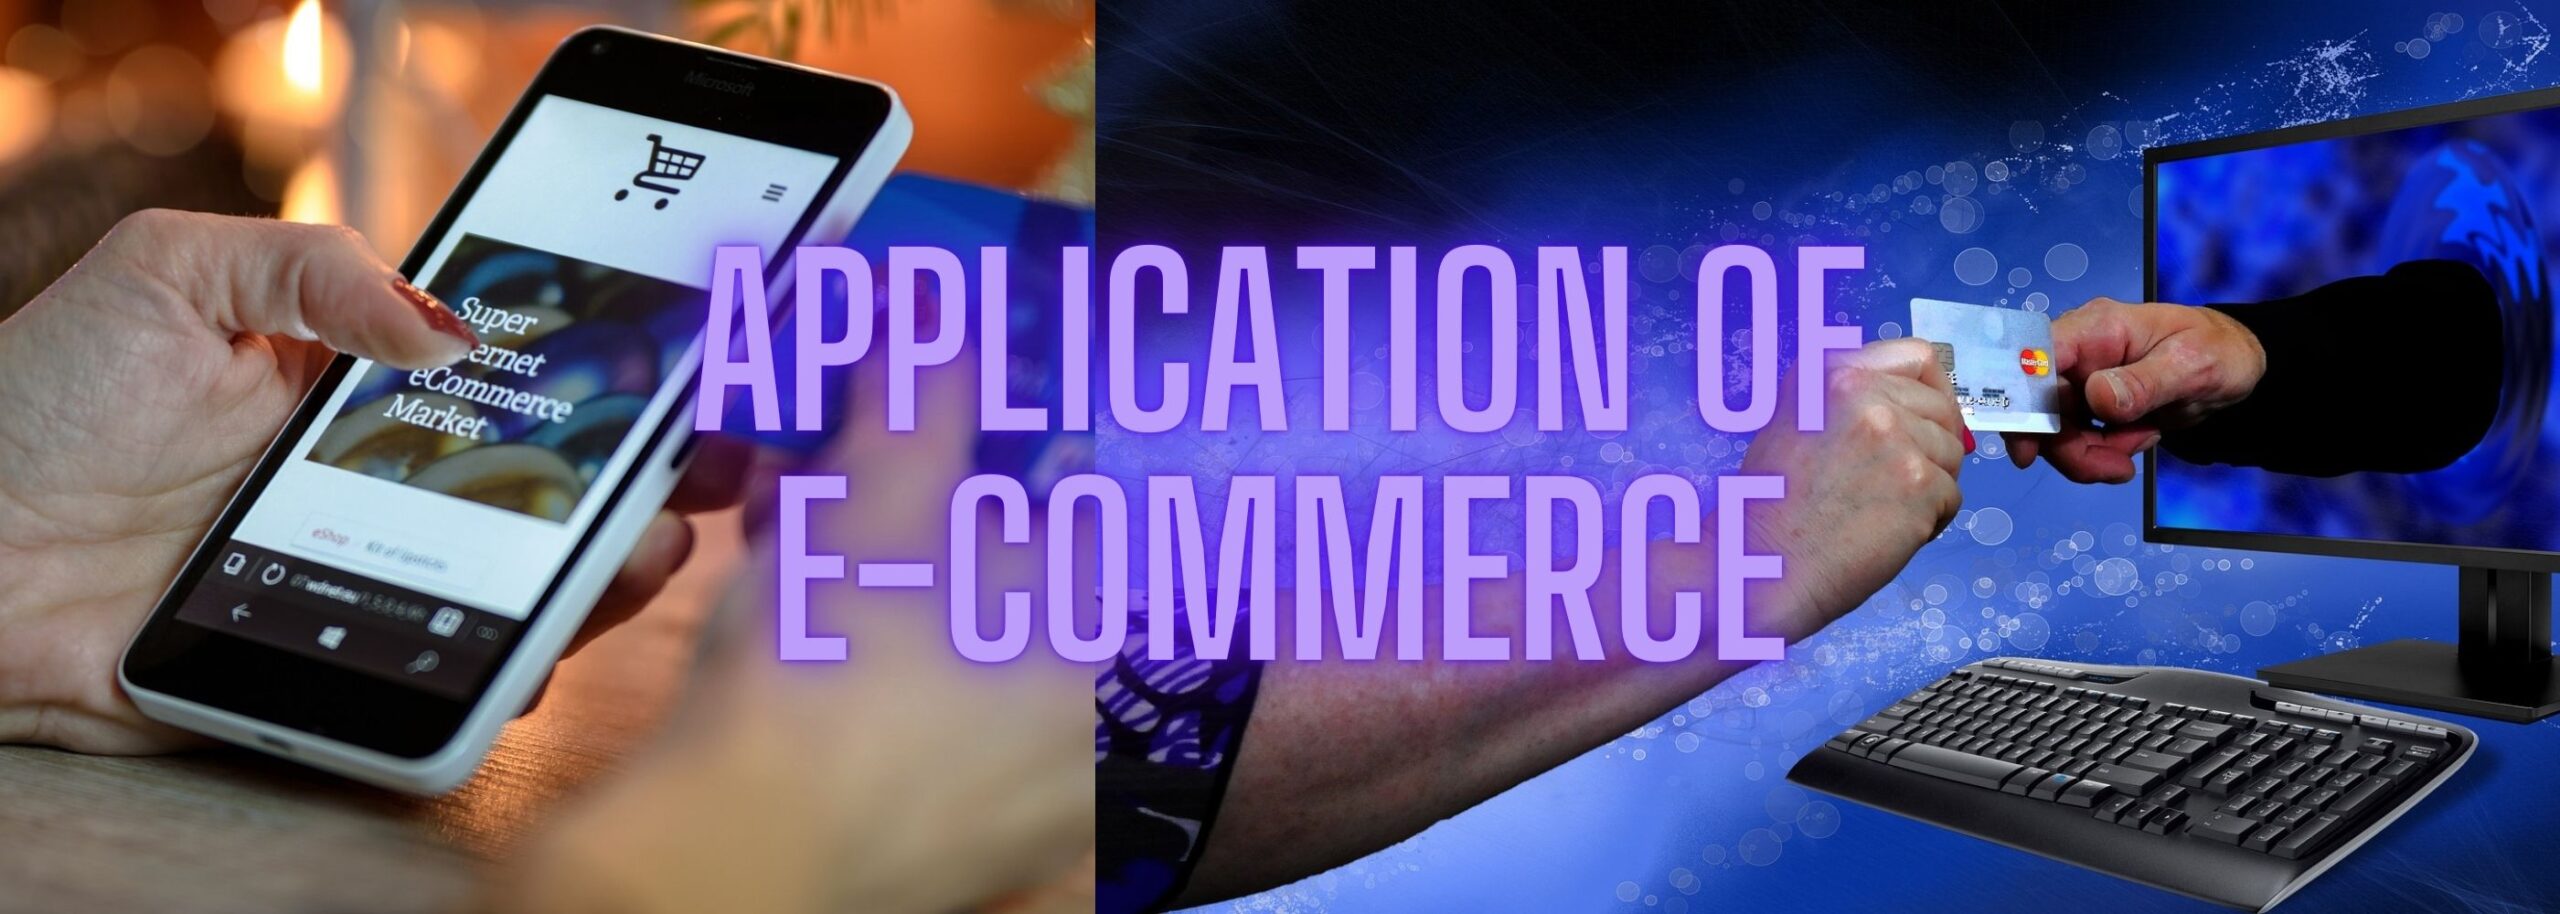 application-of-e-commerce-all-you-need-to-know-datatrained